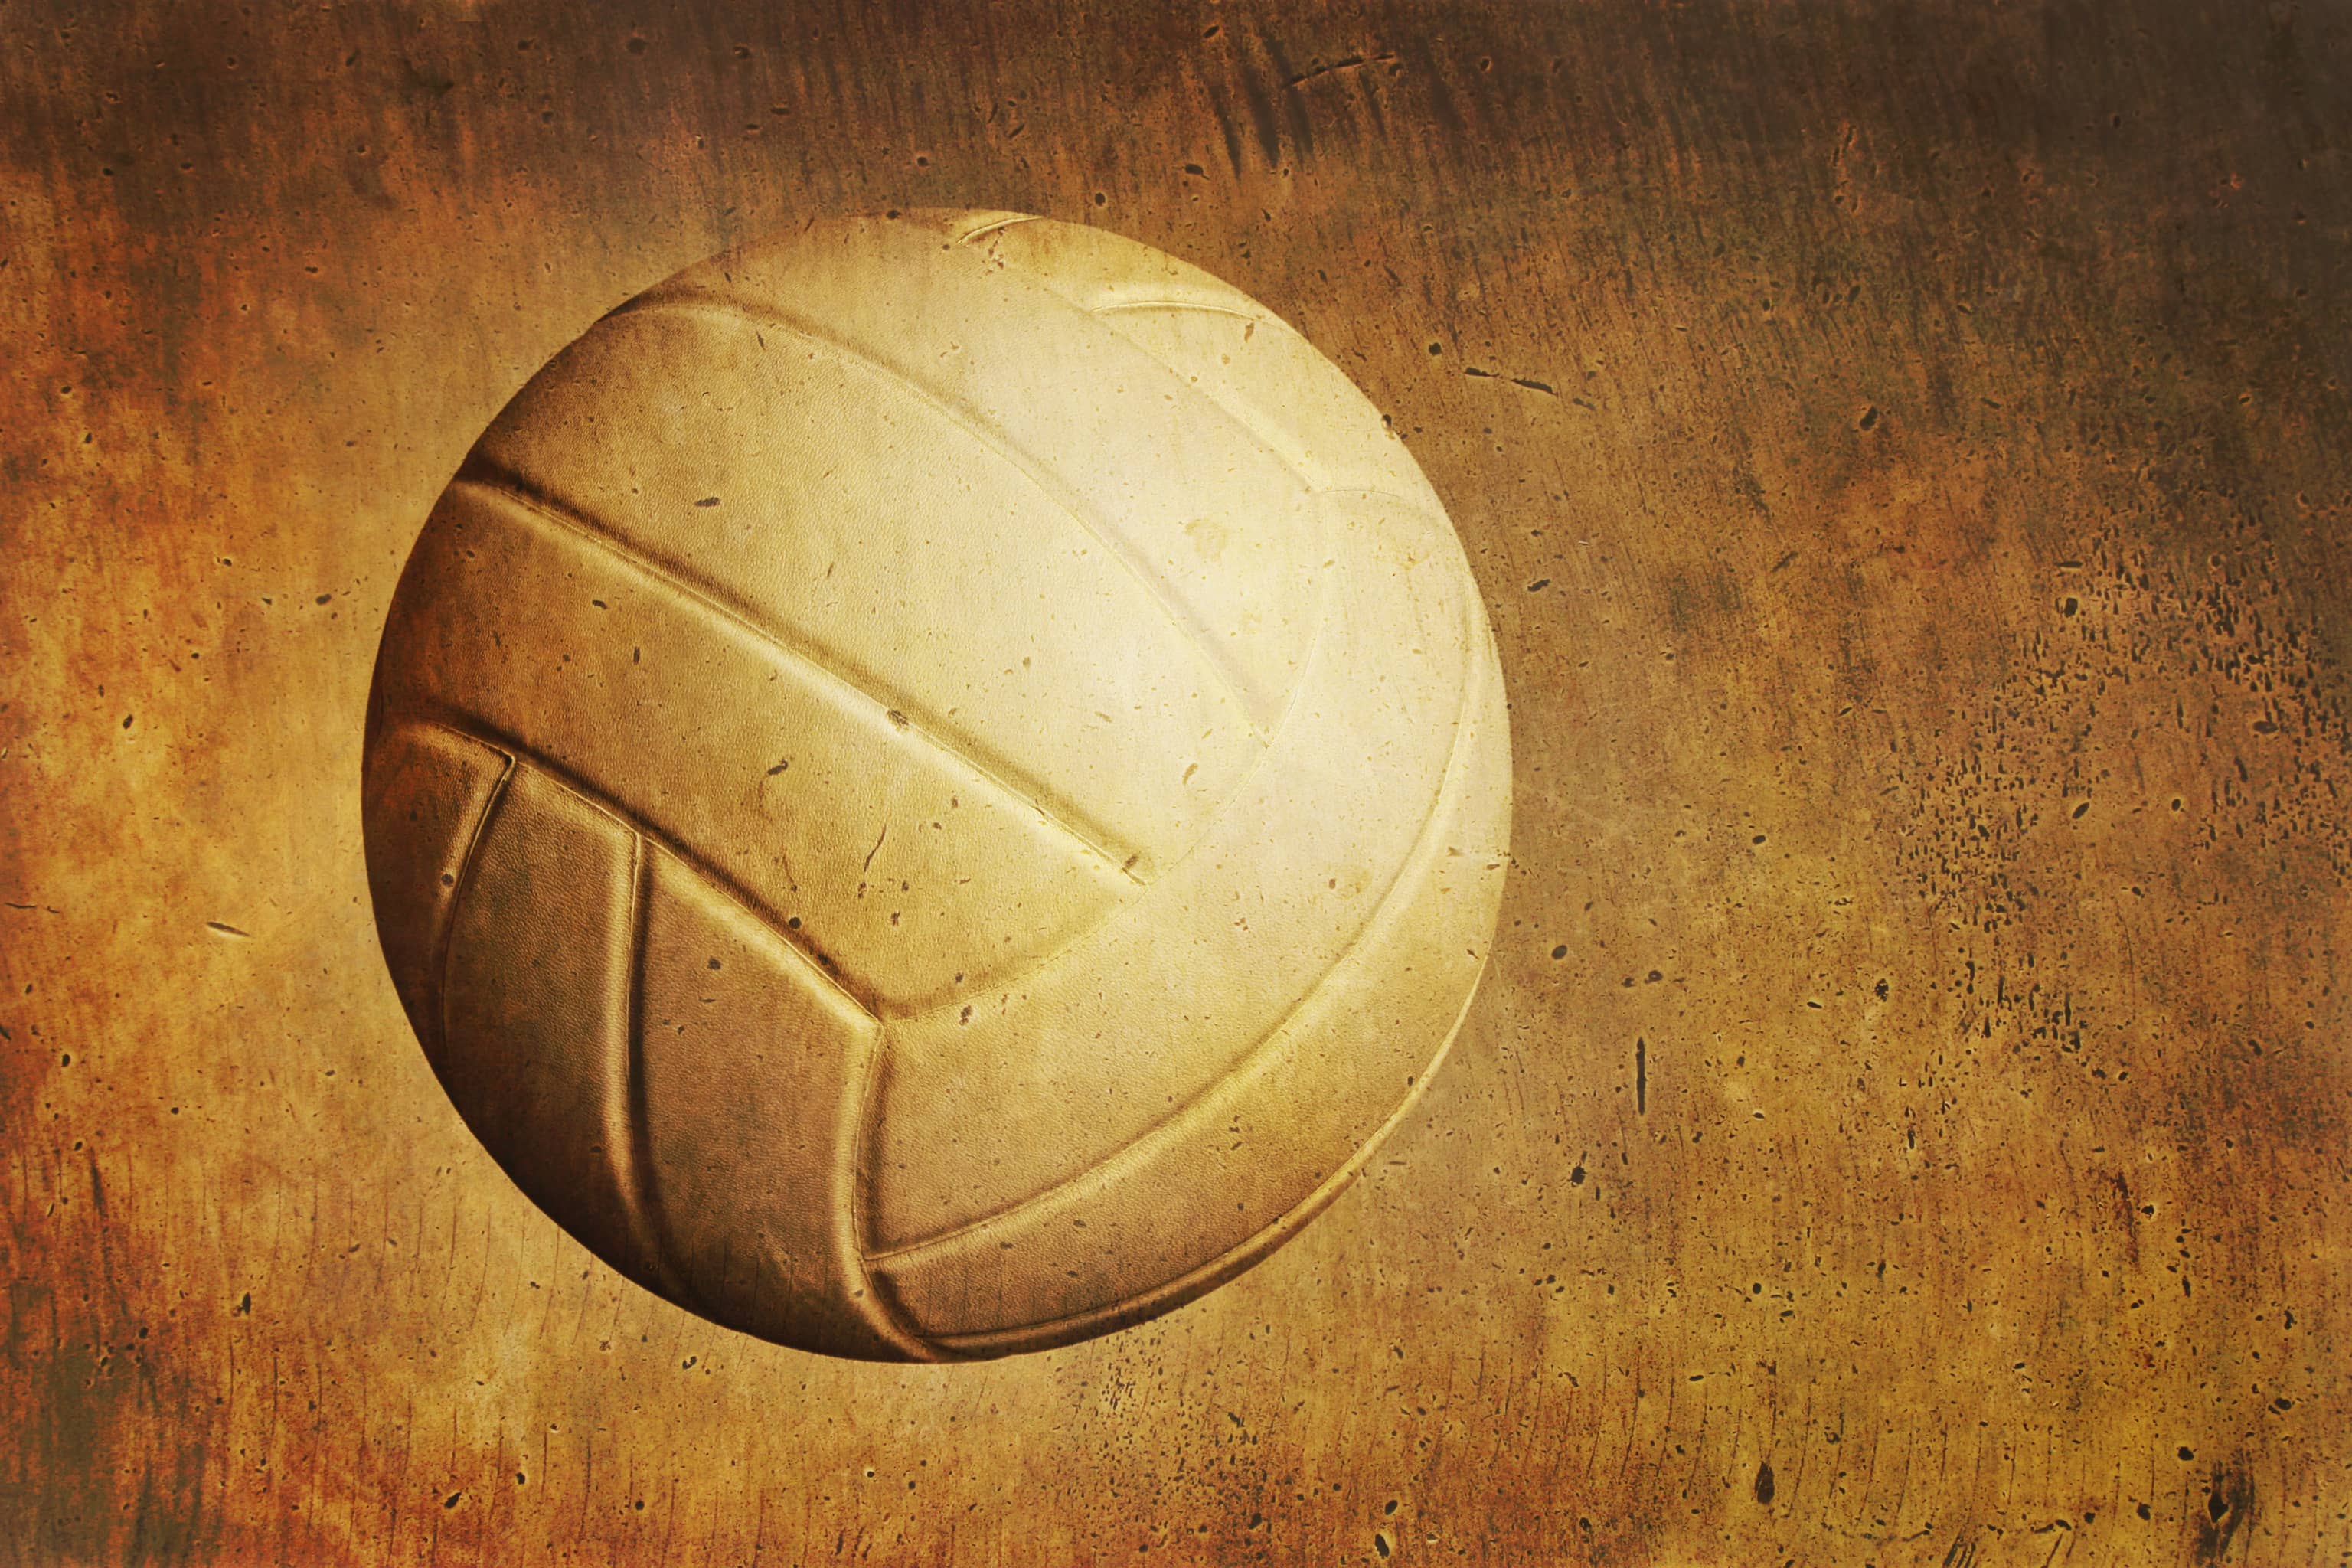 a-volleyball-on-a-grunge-textured-background-3